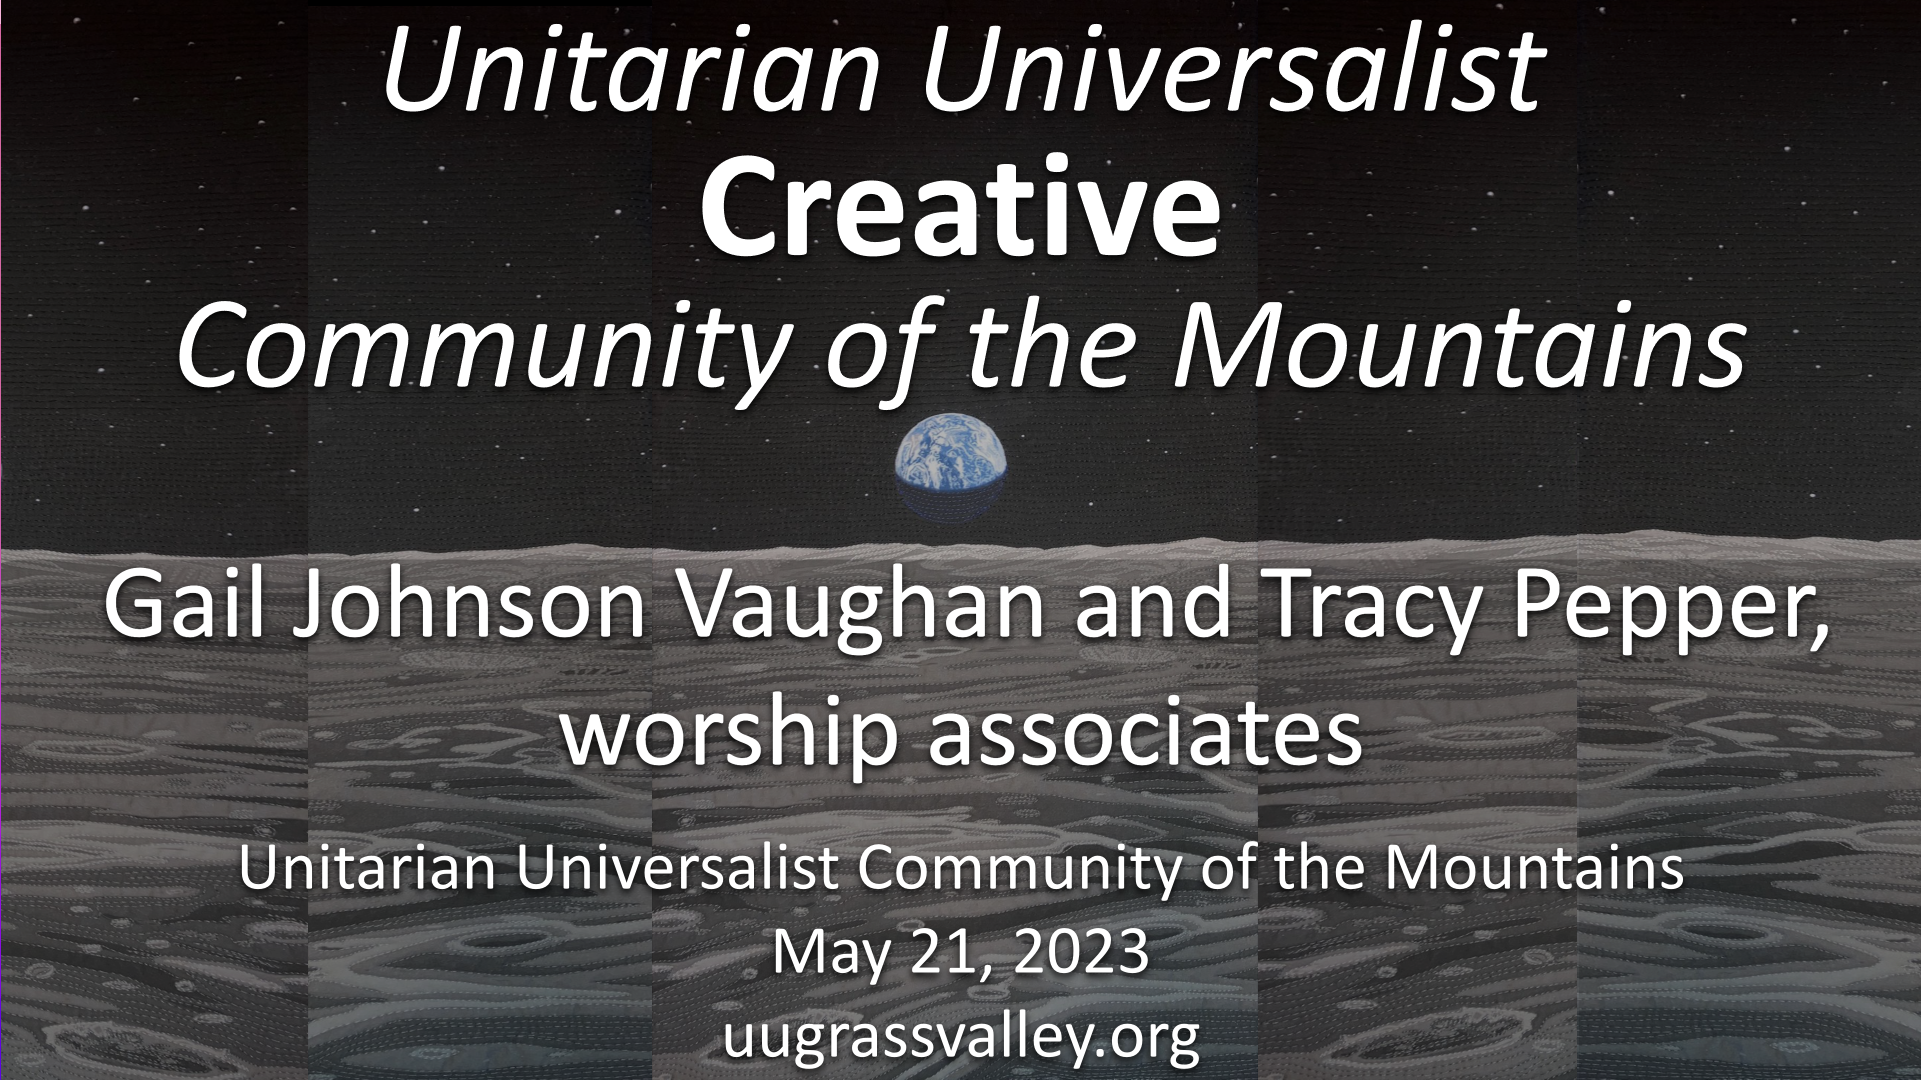 Unitarian Universalist CREATIVE Community of the Mountains – May 21, 2023